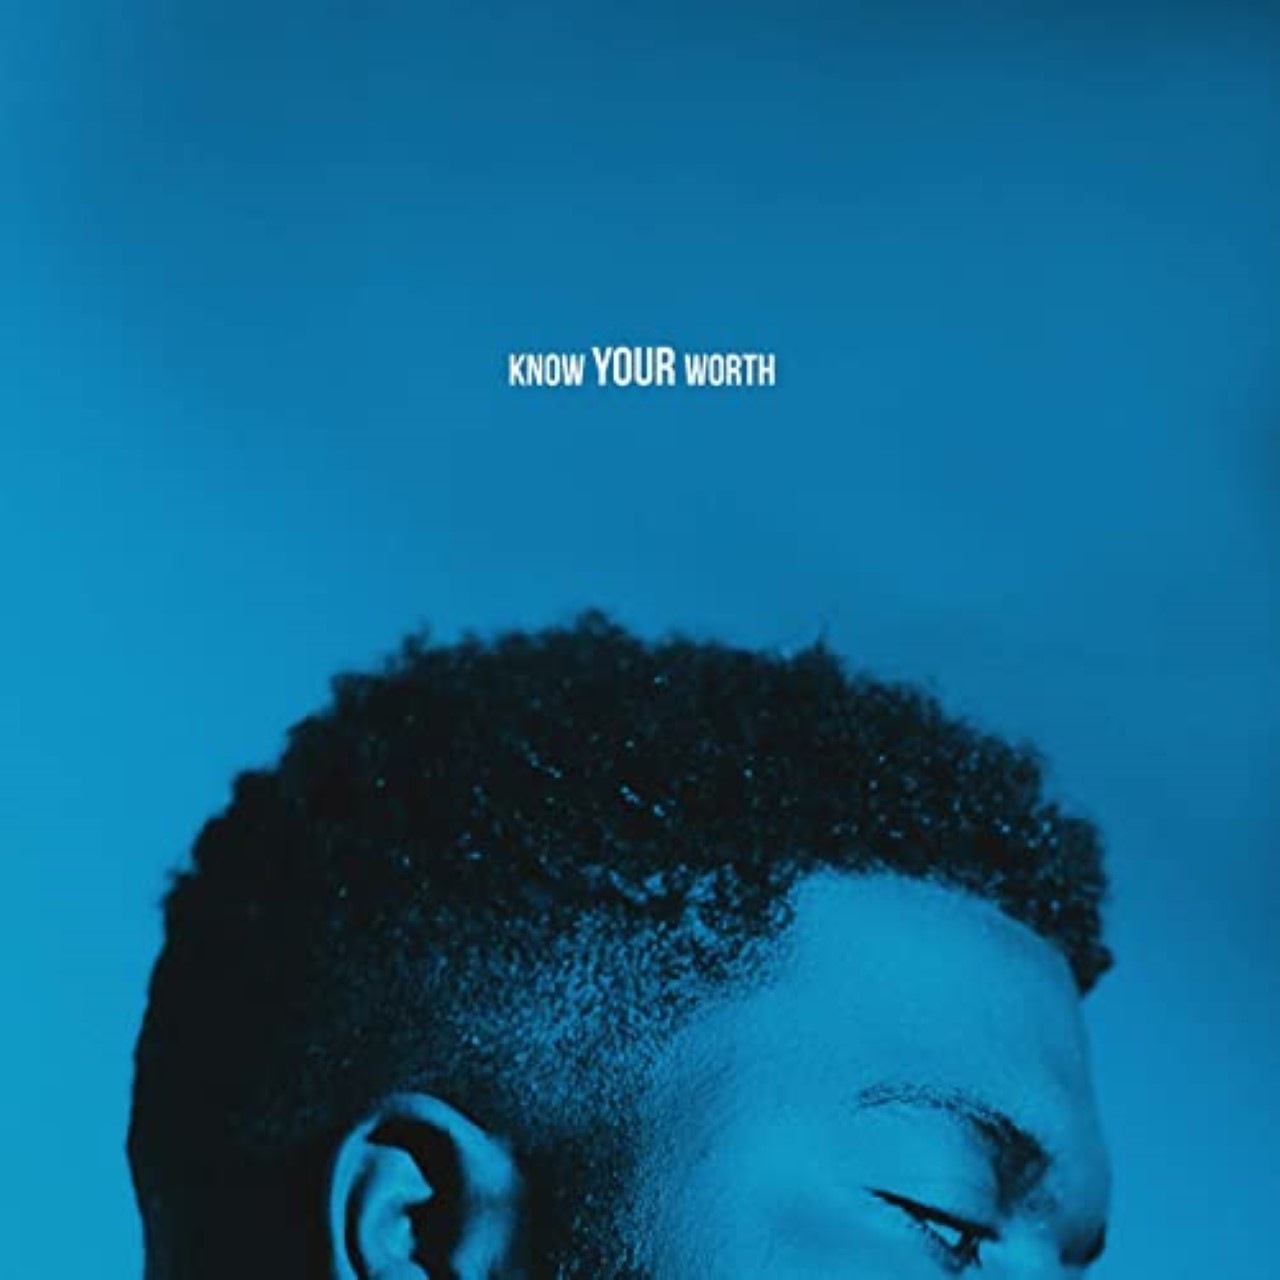 Art for Know Your Worth by Khalid